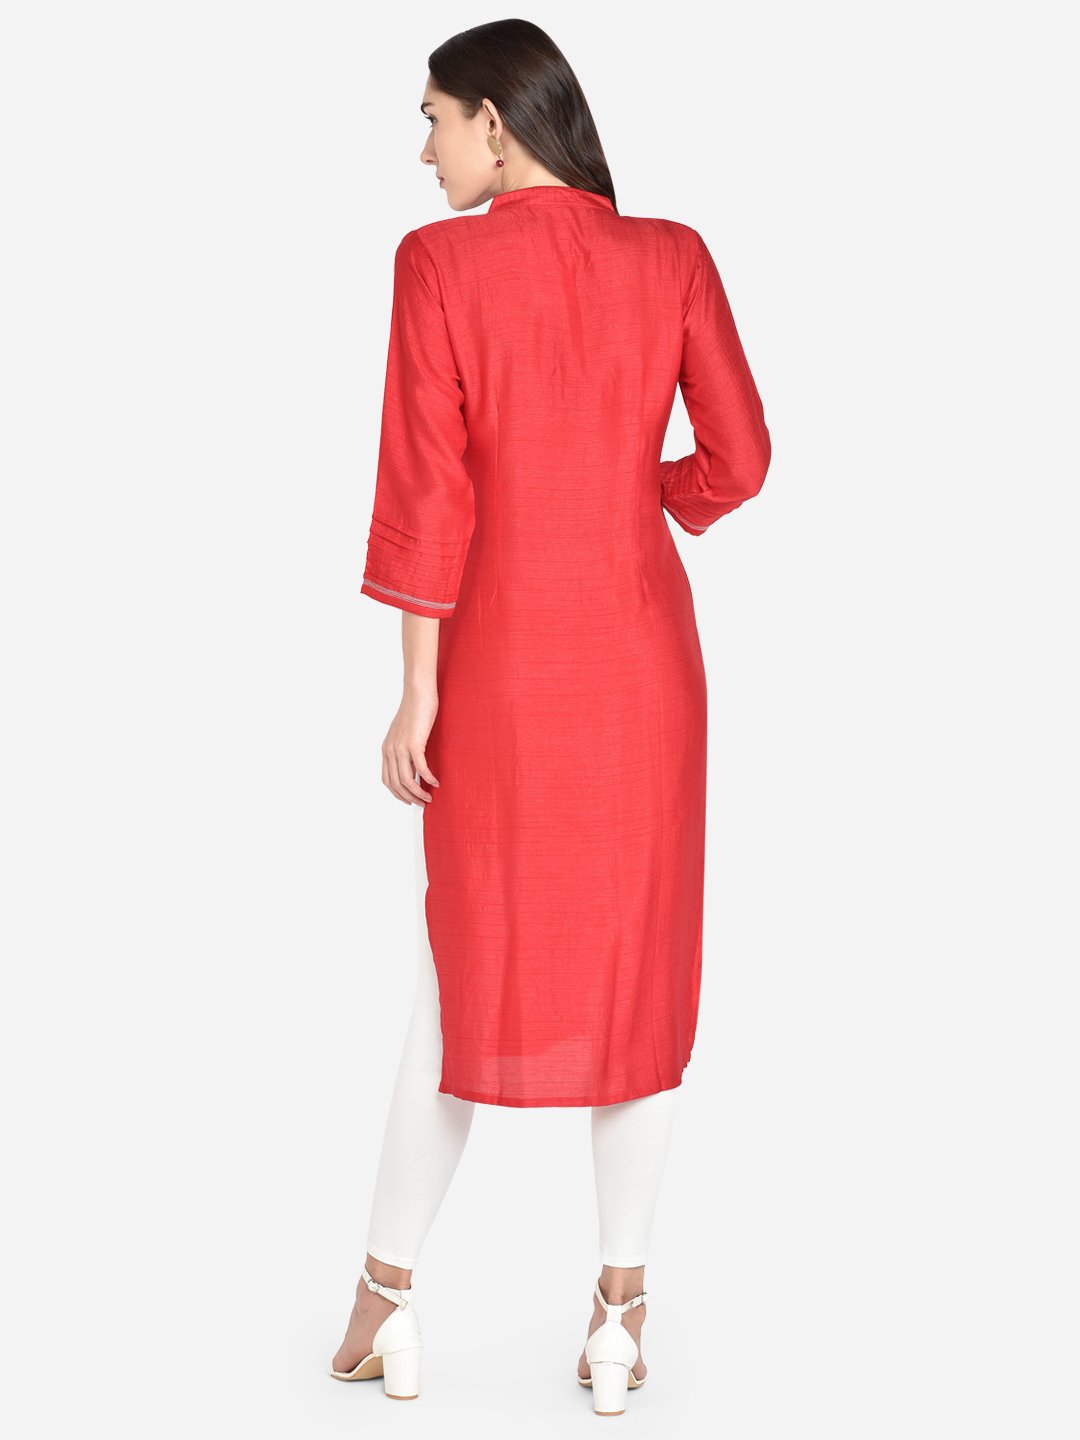 It Way Of Life -  Red Solid Woven Kurti